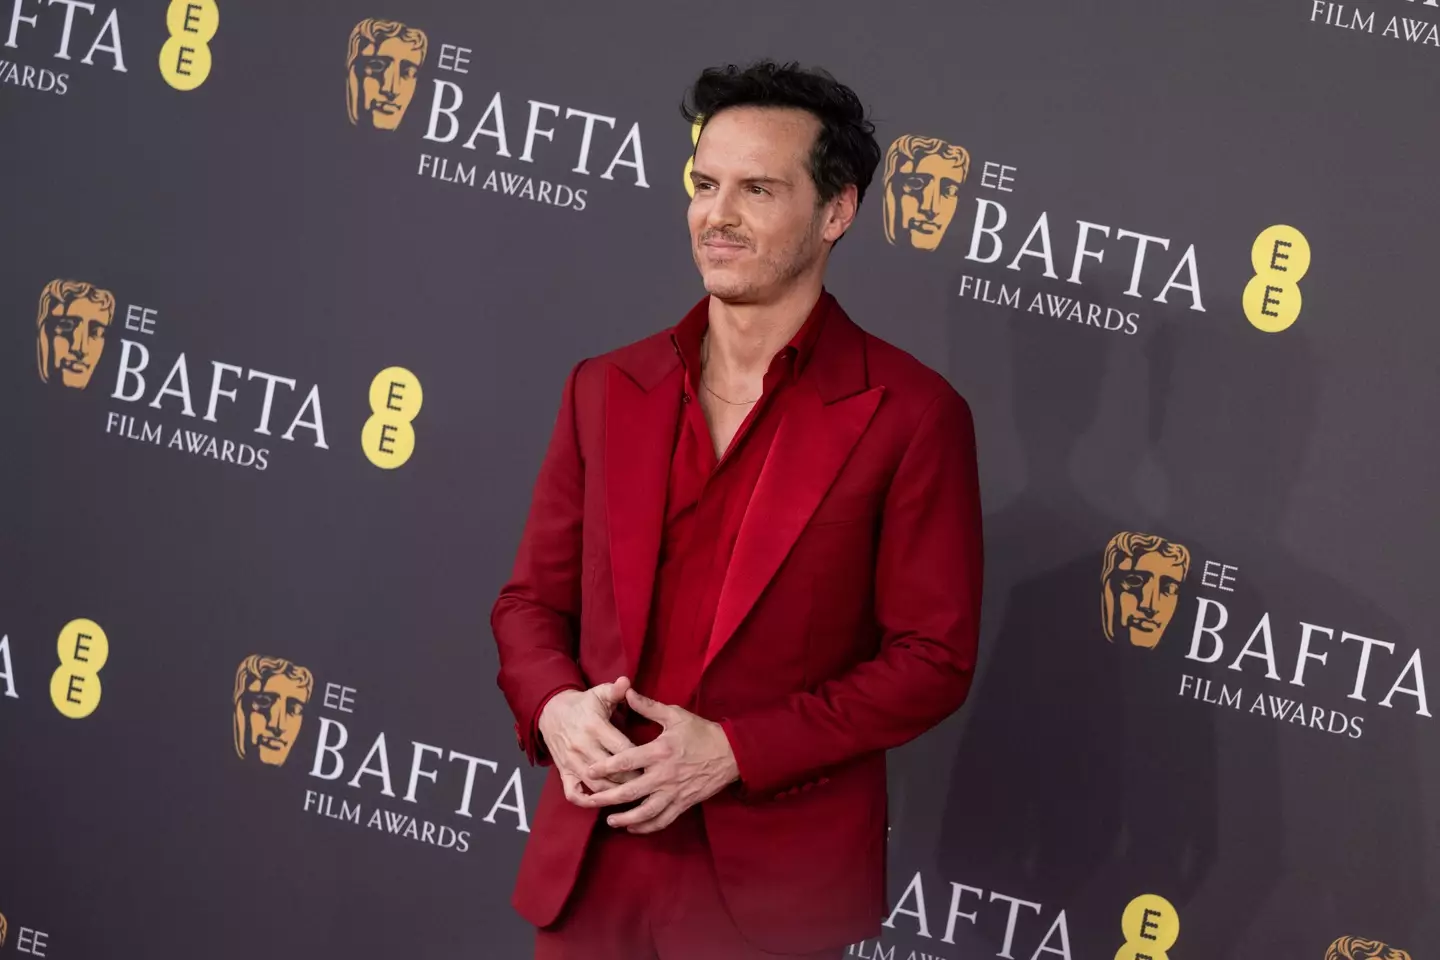 Andrew Scott walked away from the interview on the BAFTA red carpet.